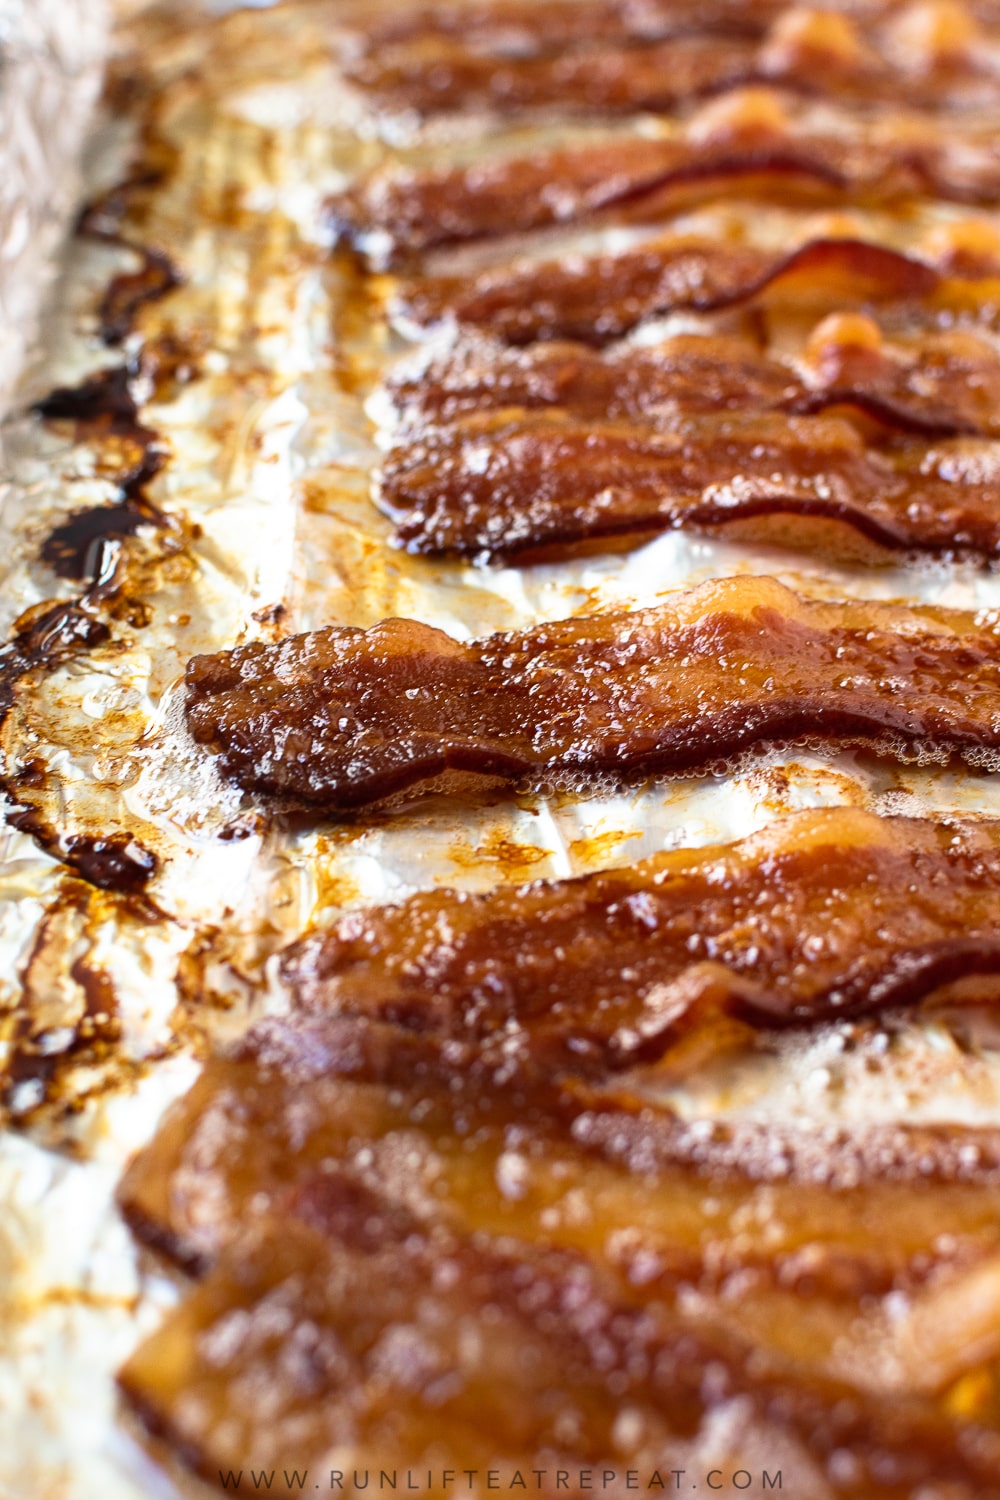 https://runlifteatrepeat.com/wp-content/uploads/2020/10/how-to-cook-bacon-in-the-oven-6.jpg